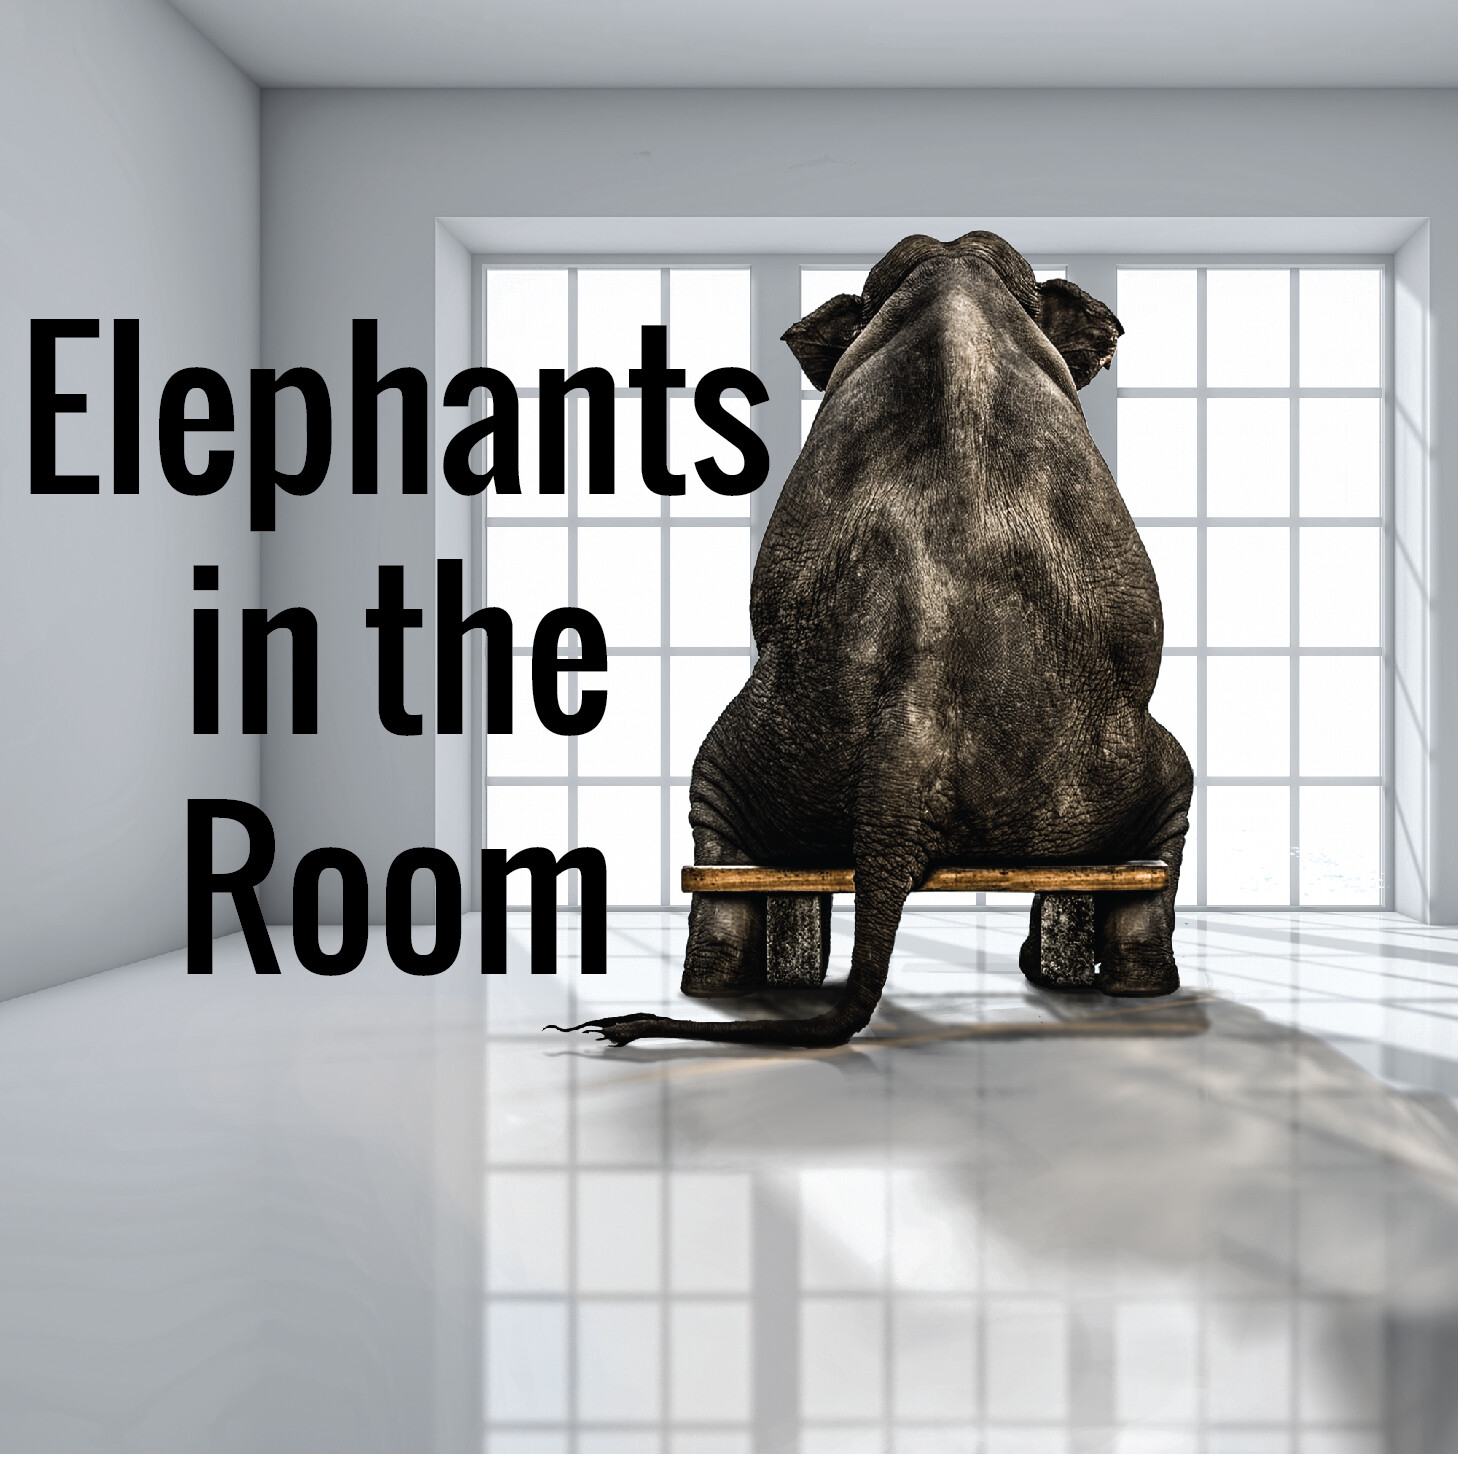 Elephants in the Room: Domestic Violence